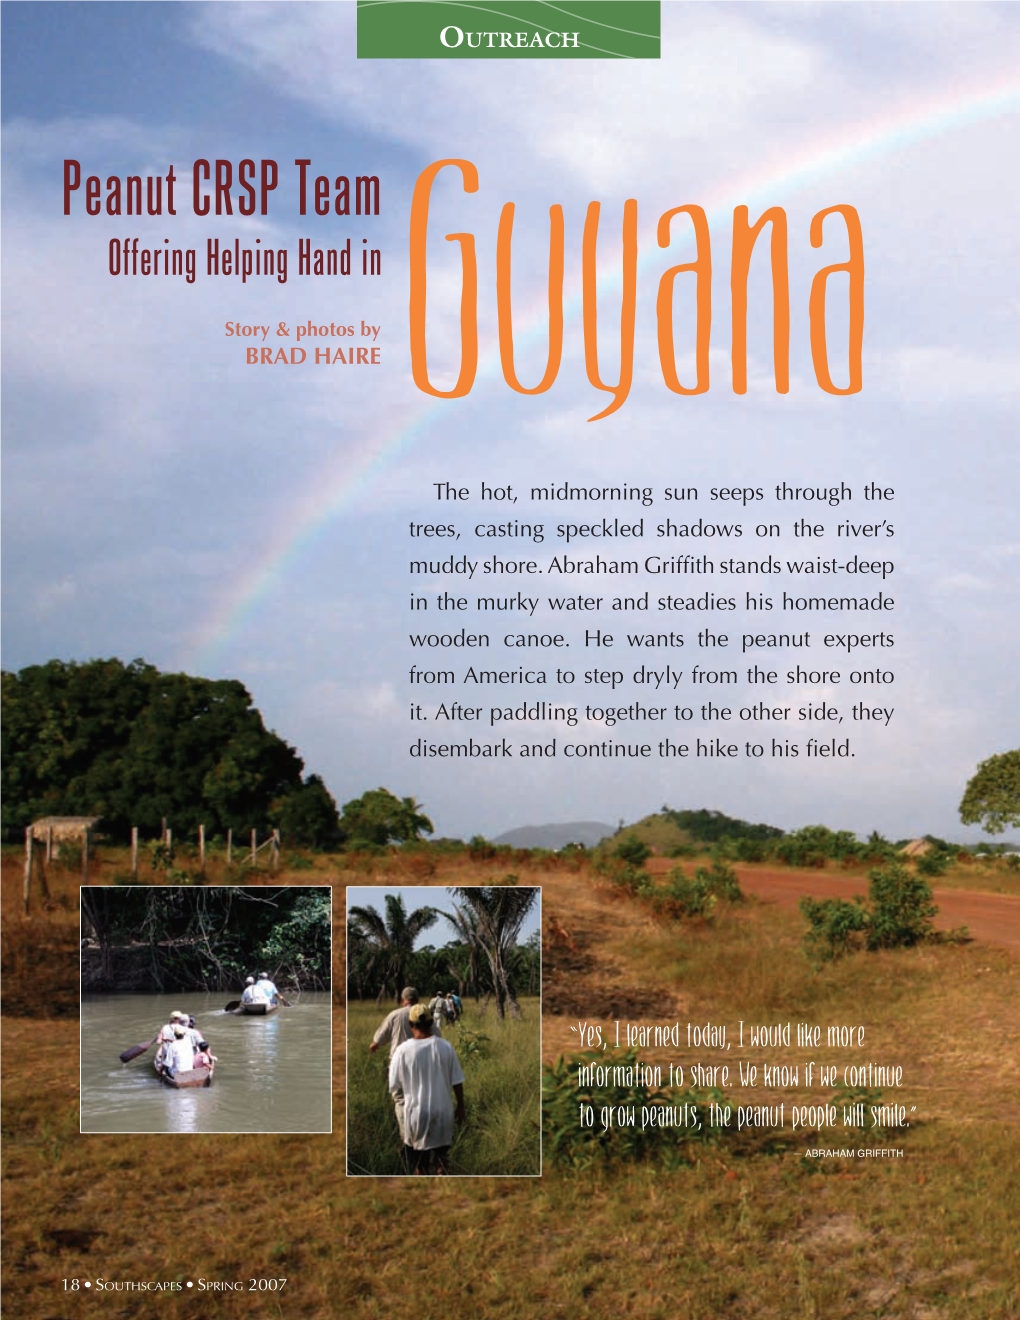 Peanut CRSP Team Offering Helping Hand In